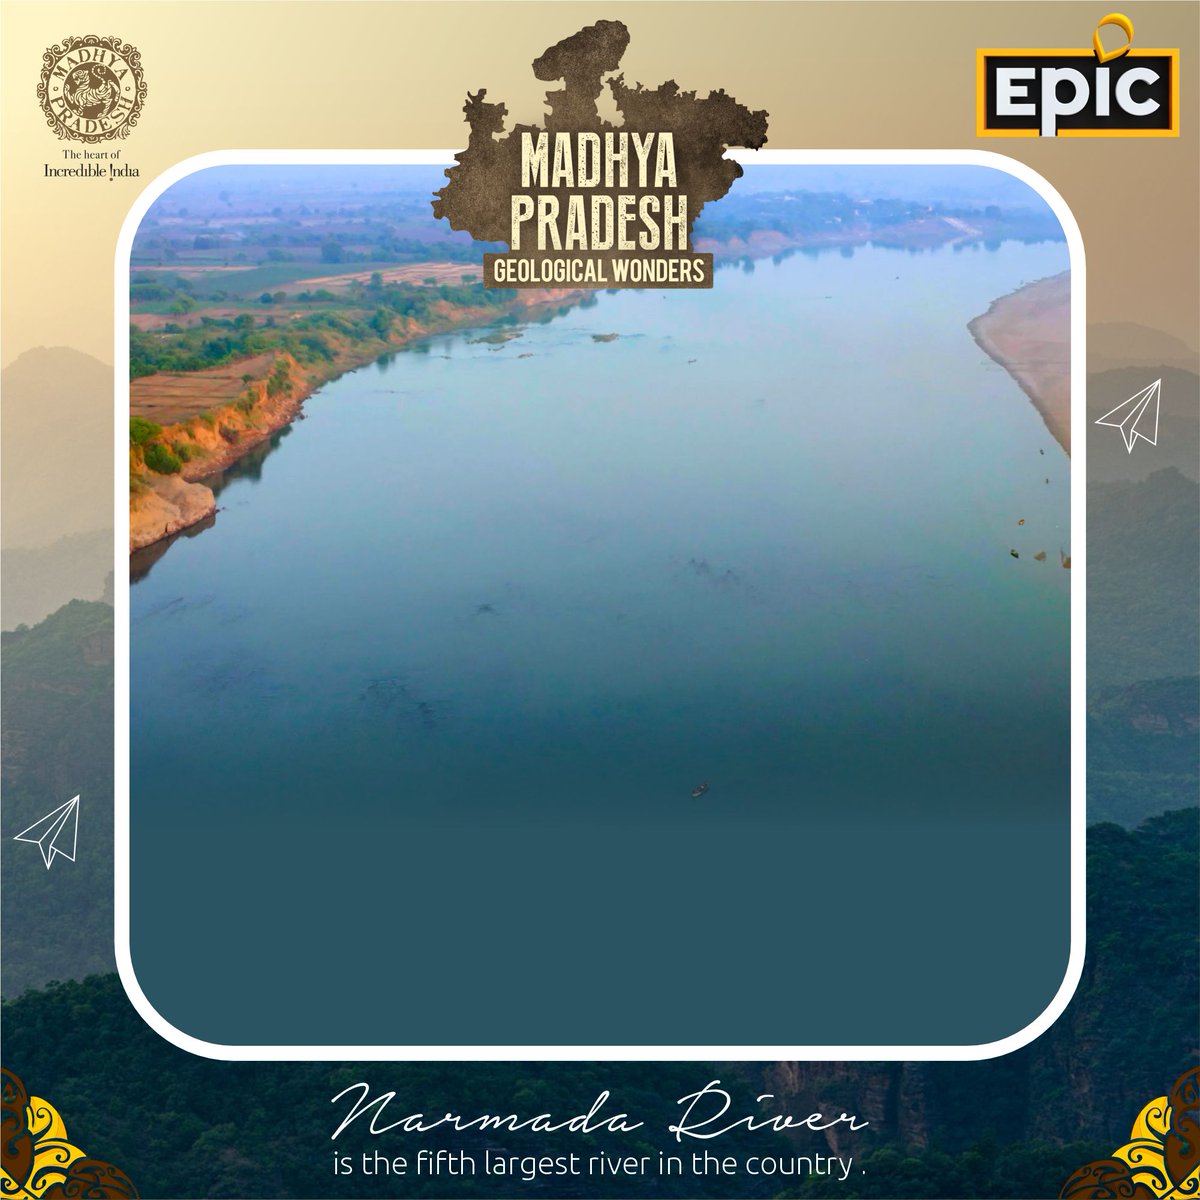 The Narmada River is of great importance for #MadhyaPradesh ! 🌊 It provides water for irrigation, domestic use, and industry, supporting agriculture and economic growth. It's also a symbol of cultural heritage and a source of spirituality. #NarmadaRiver #Importance